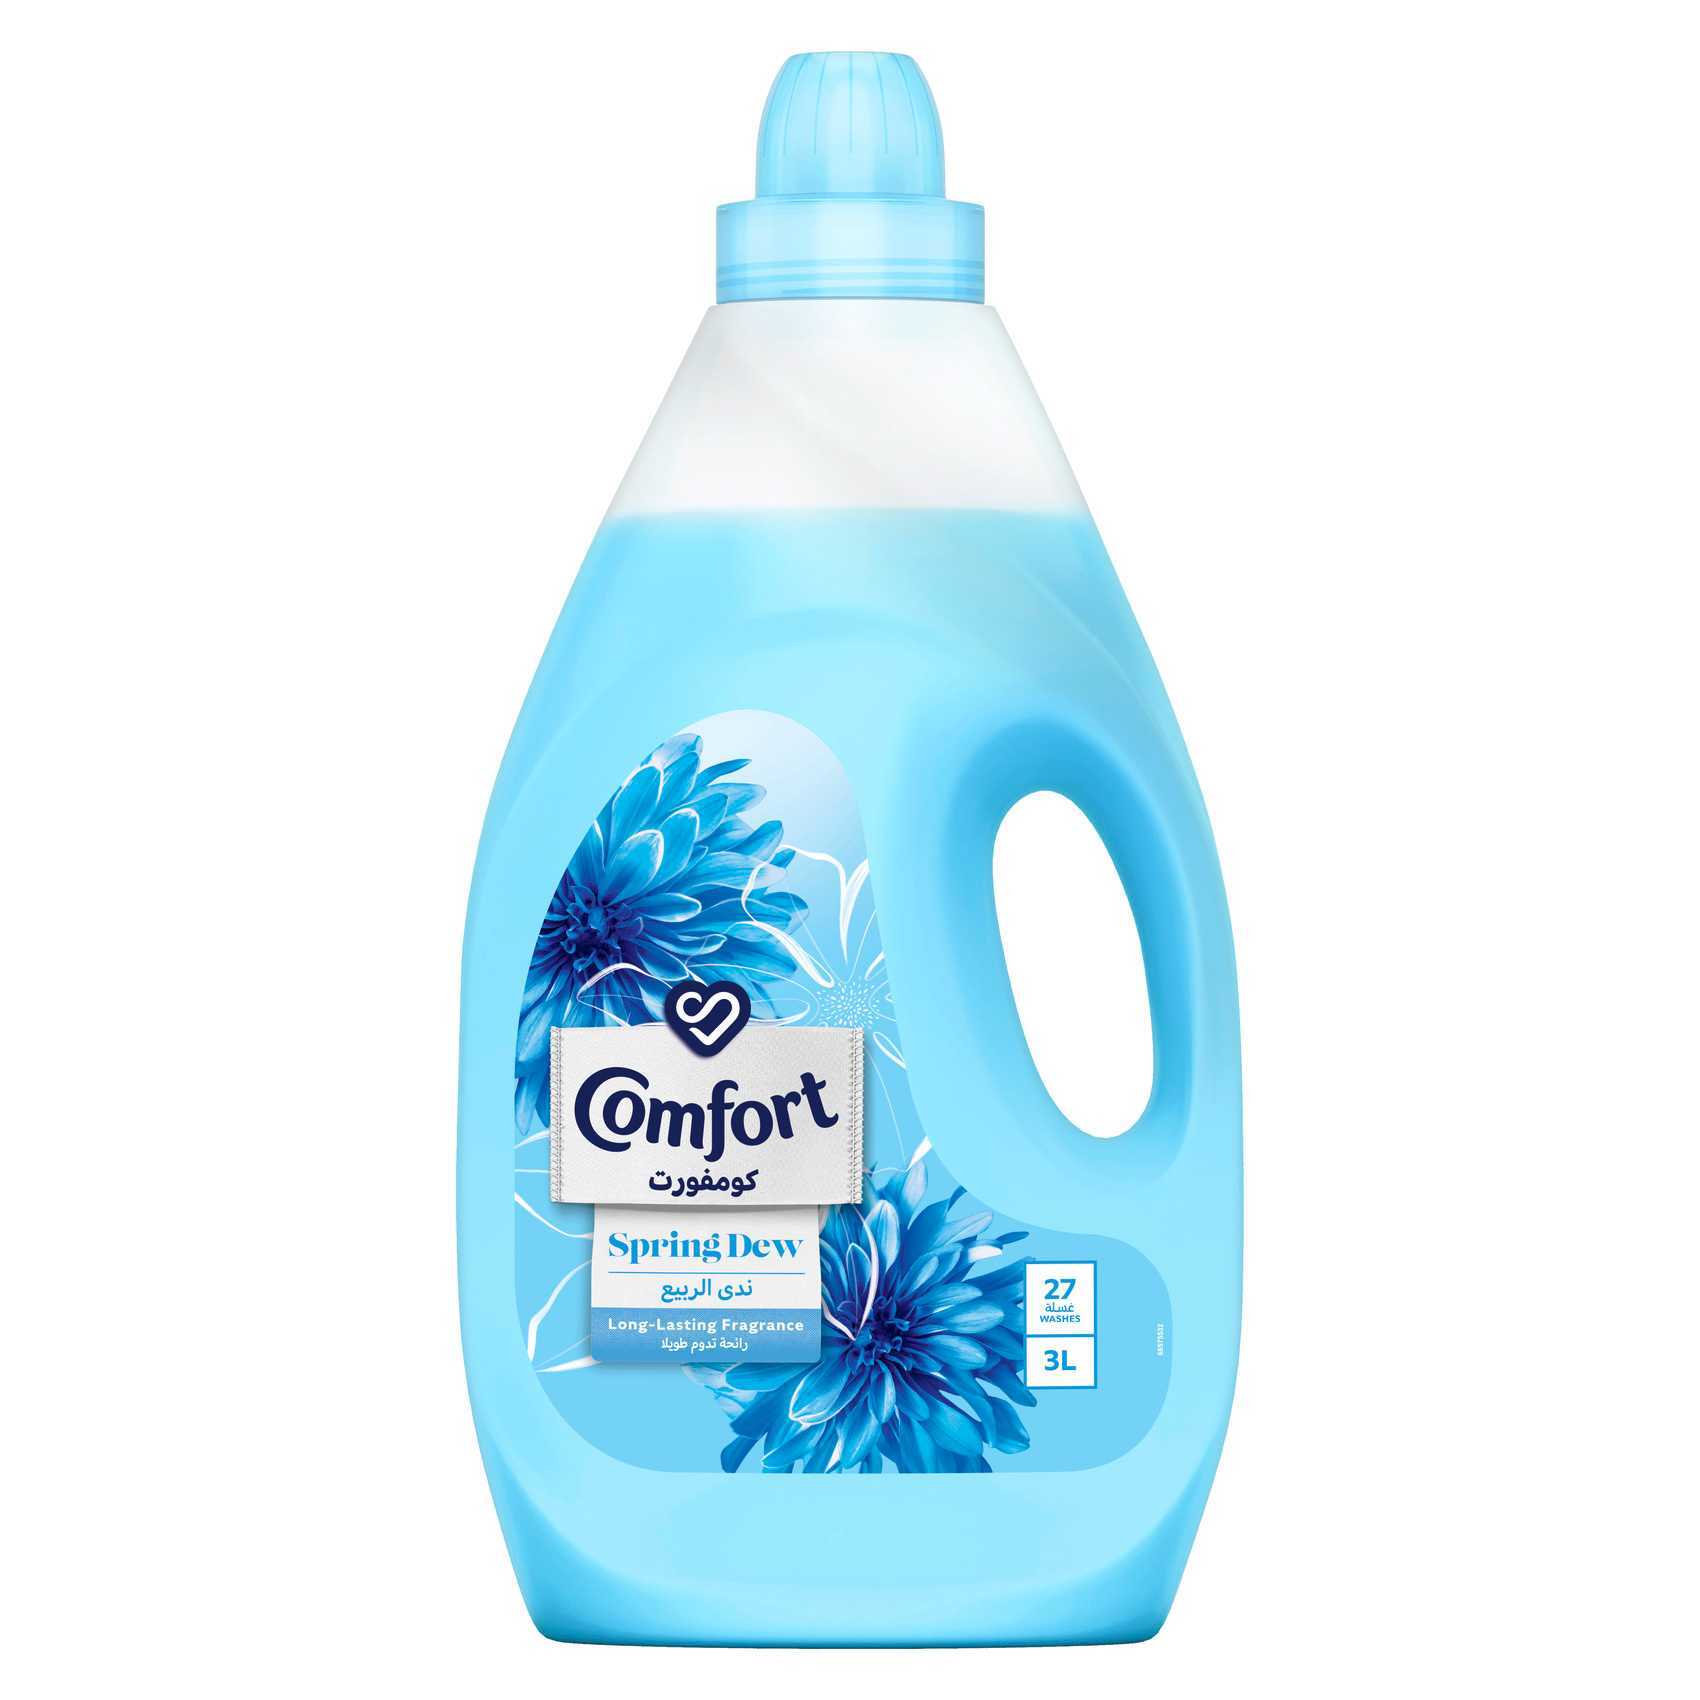 Buy Comfort Fabric Softener Spring Dew 3L Online - Shop Cleaning &  Household on Carrefour UAE